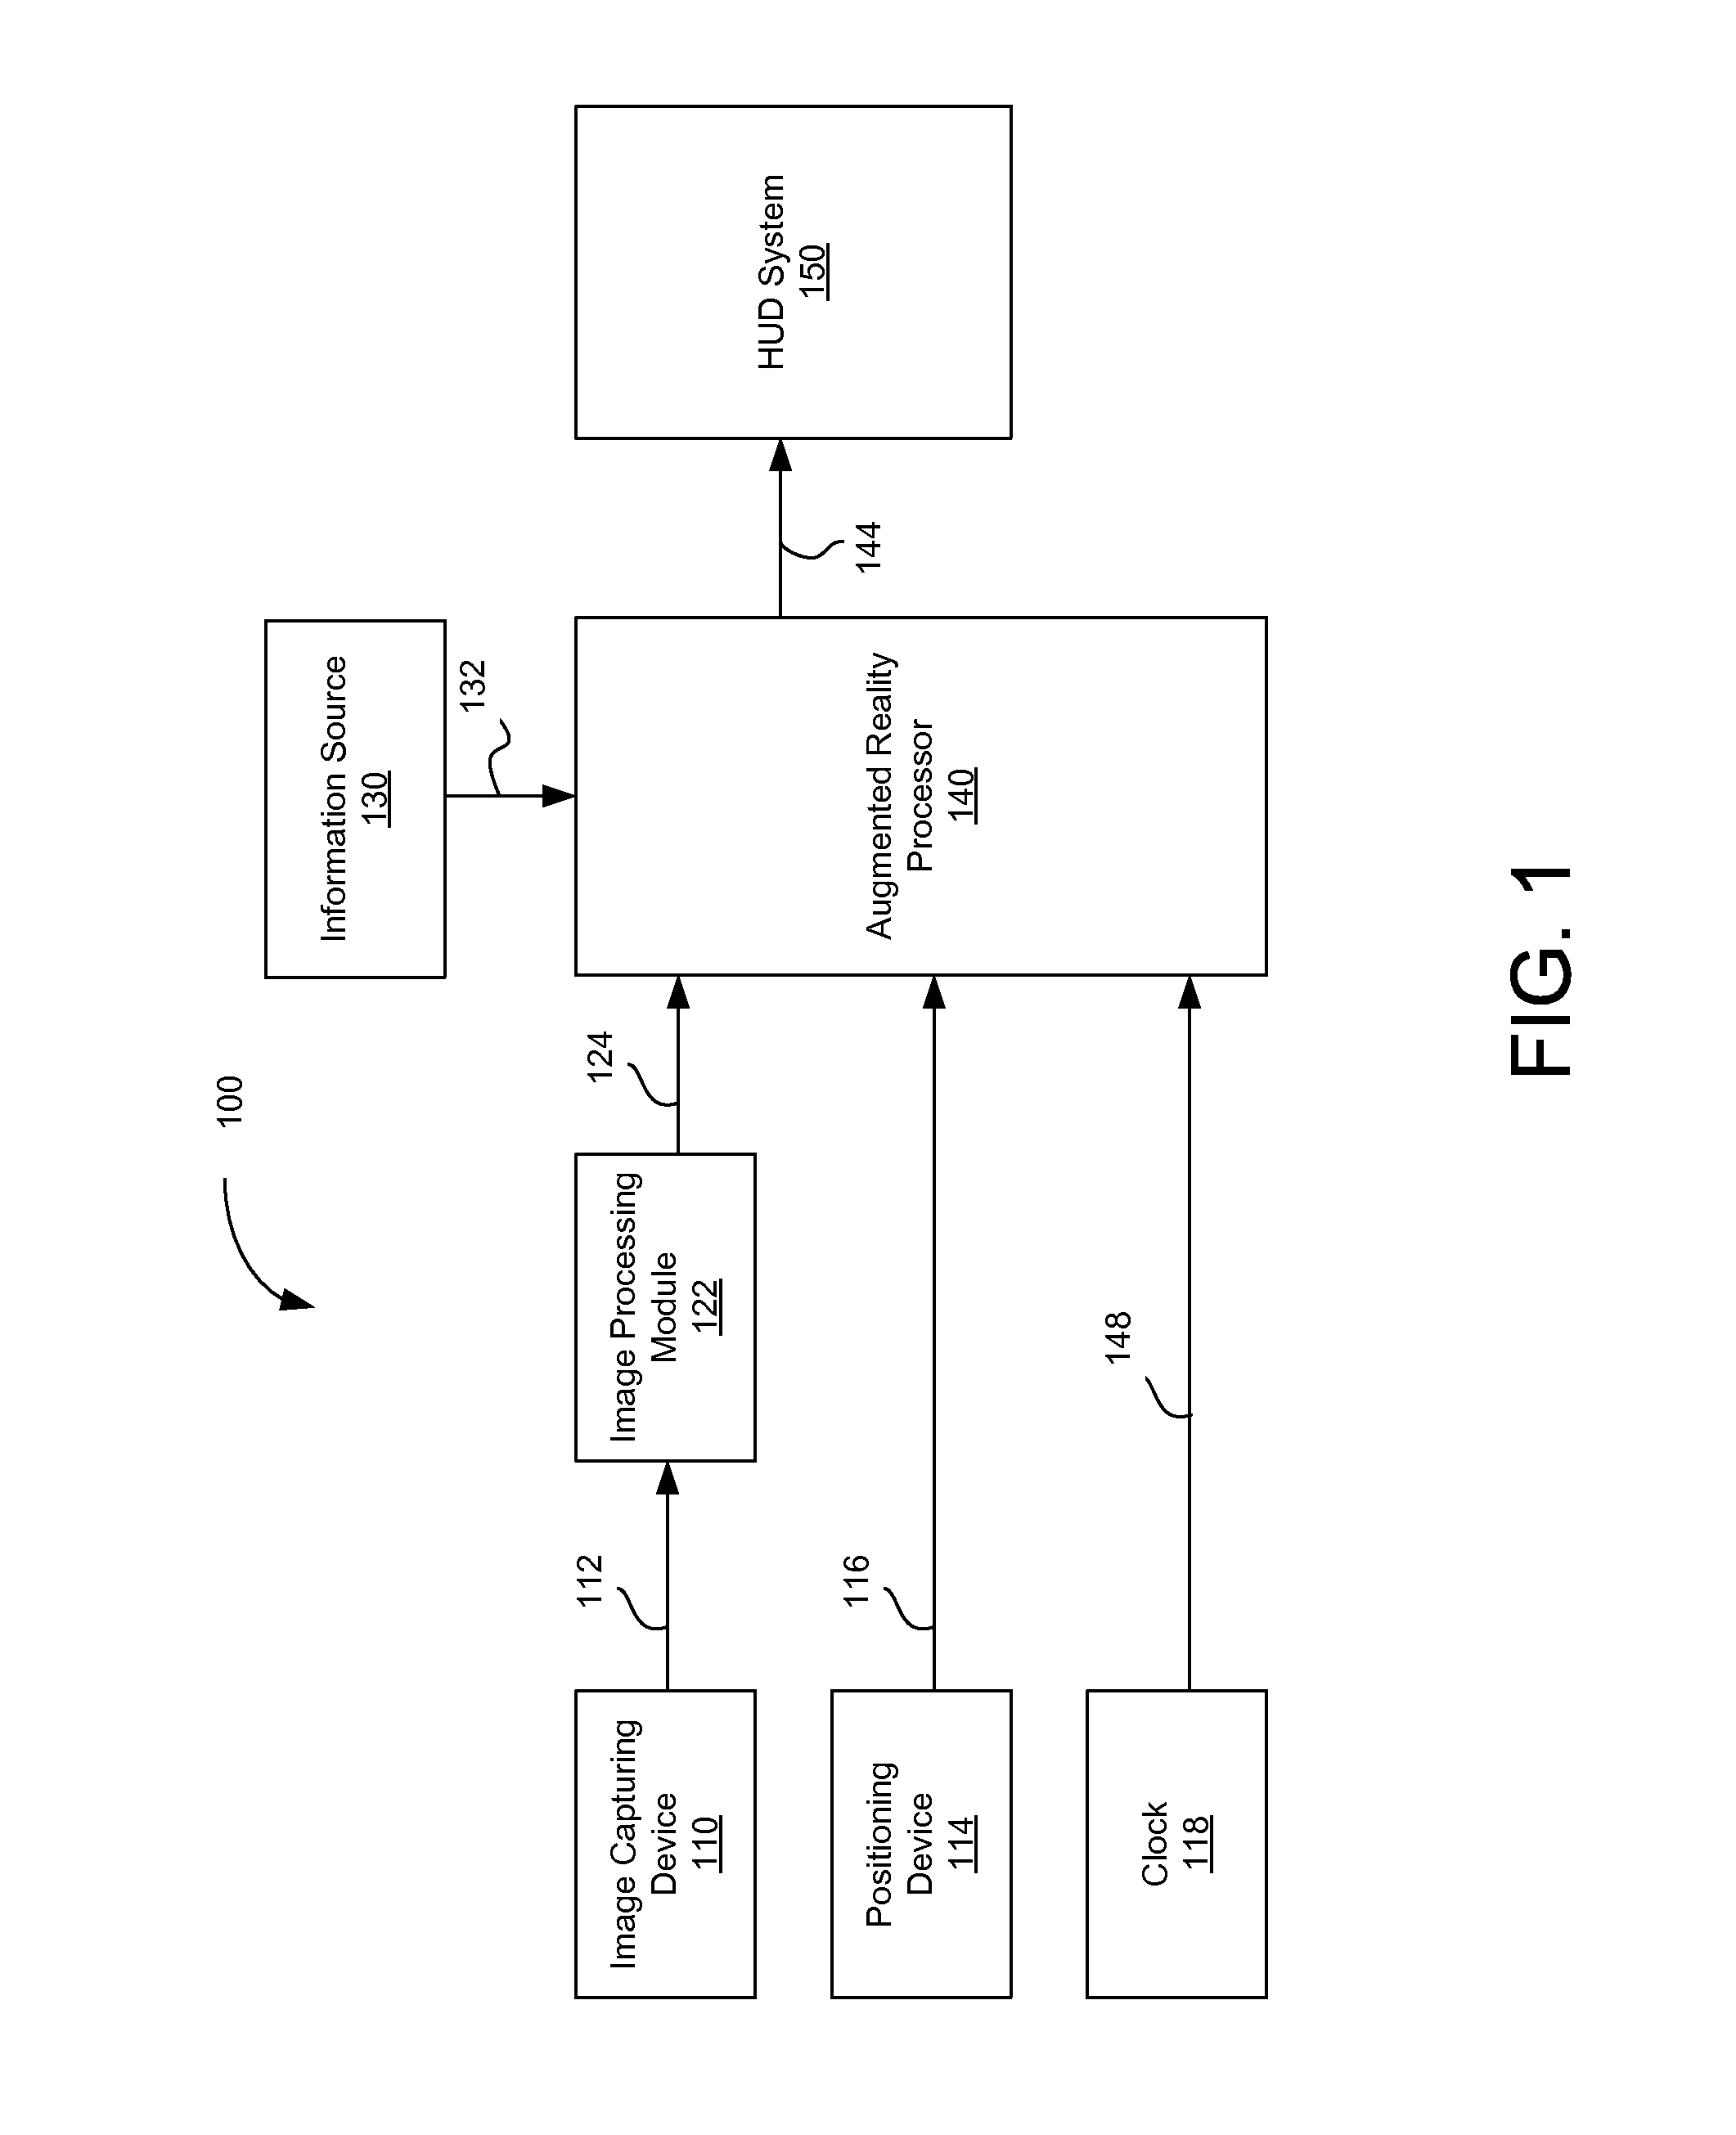 Method to generate virtual display surfaces from video imagery of road based scenery